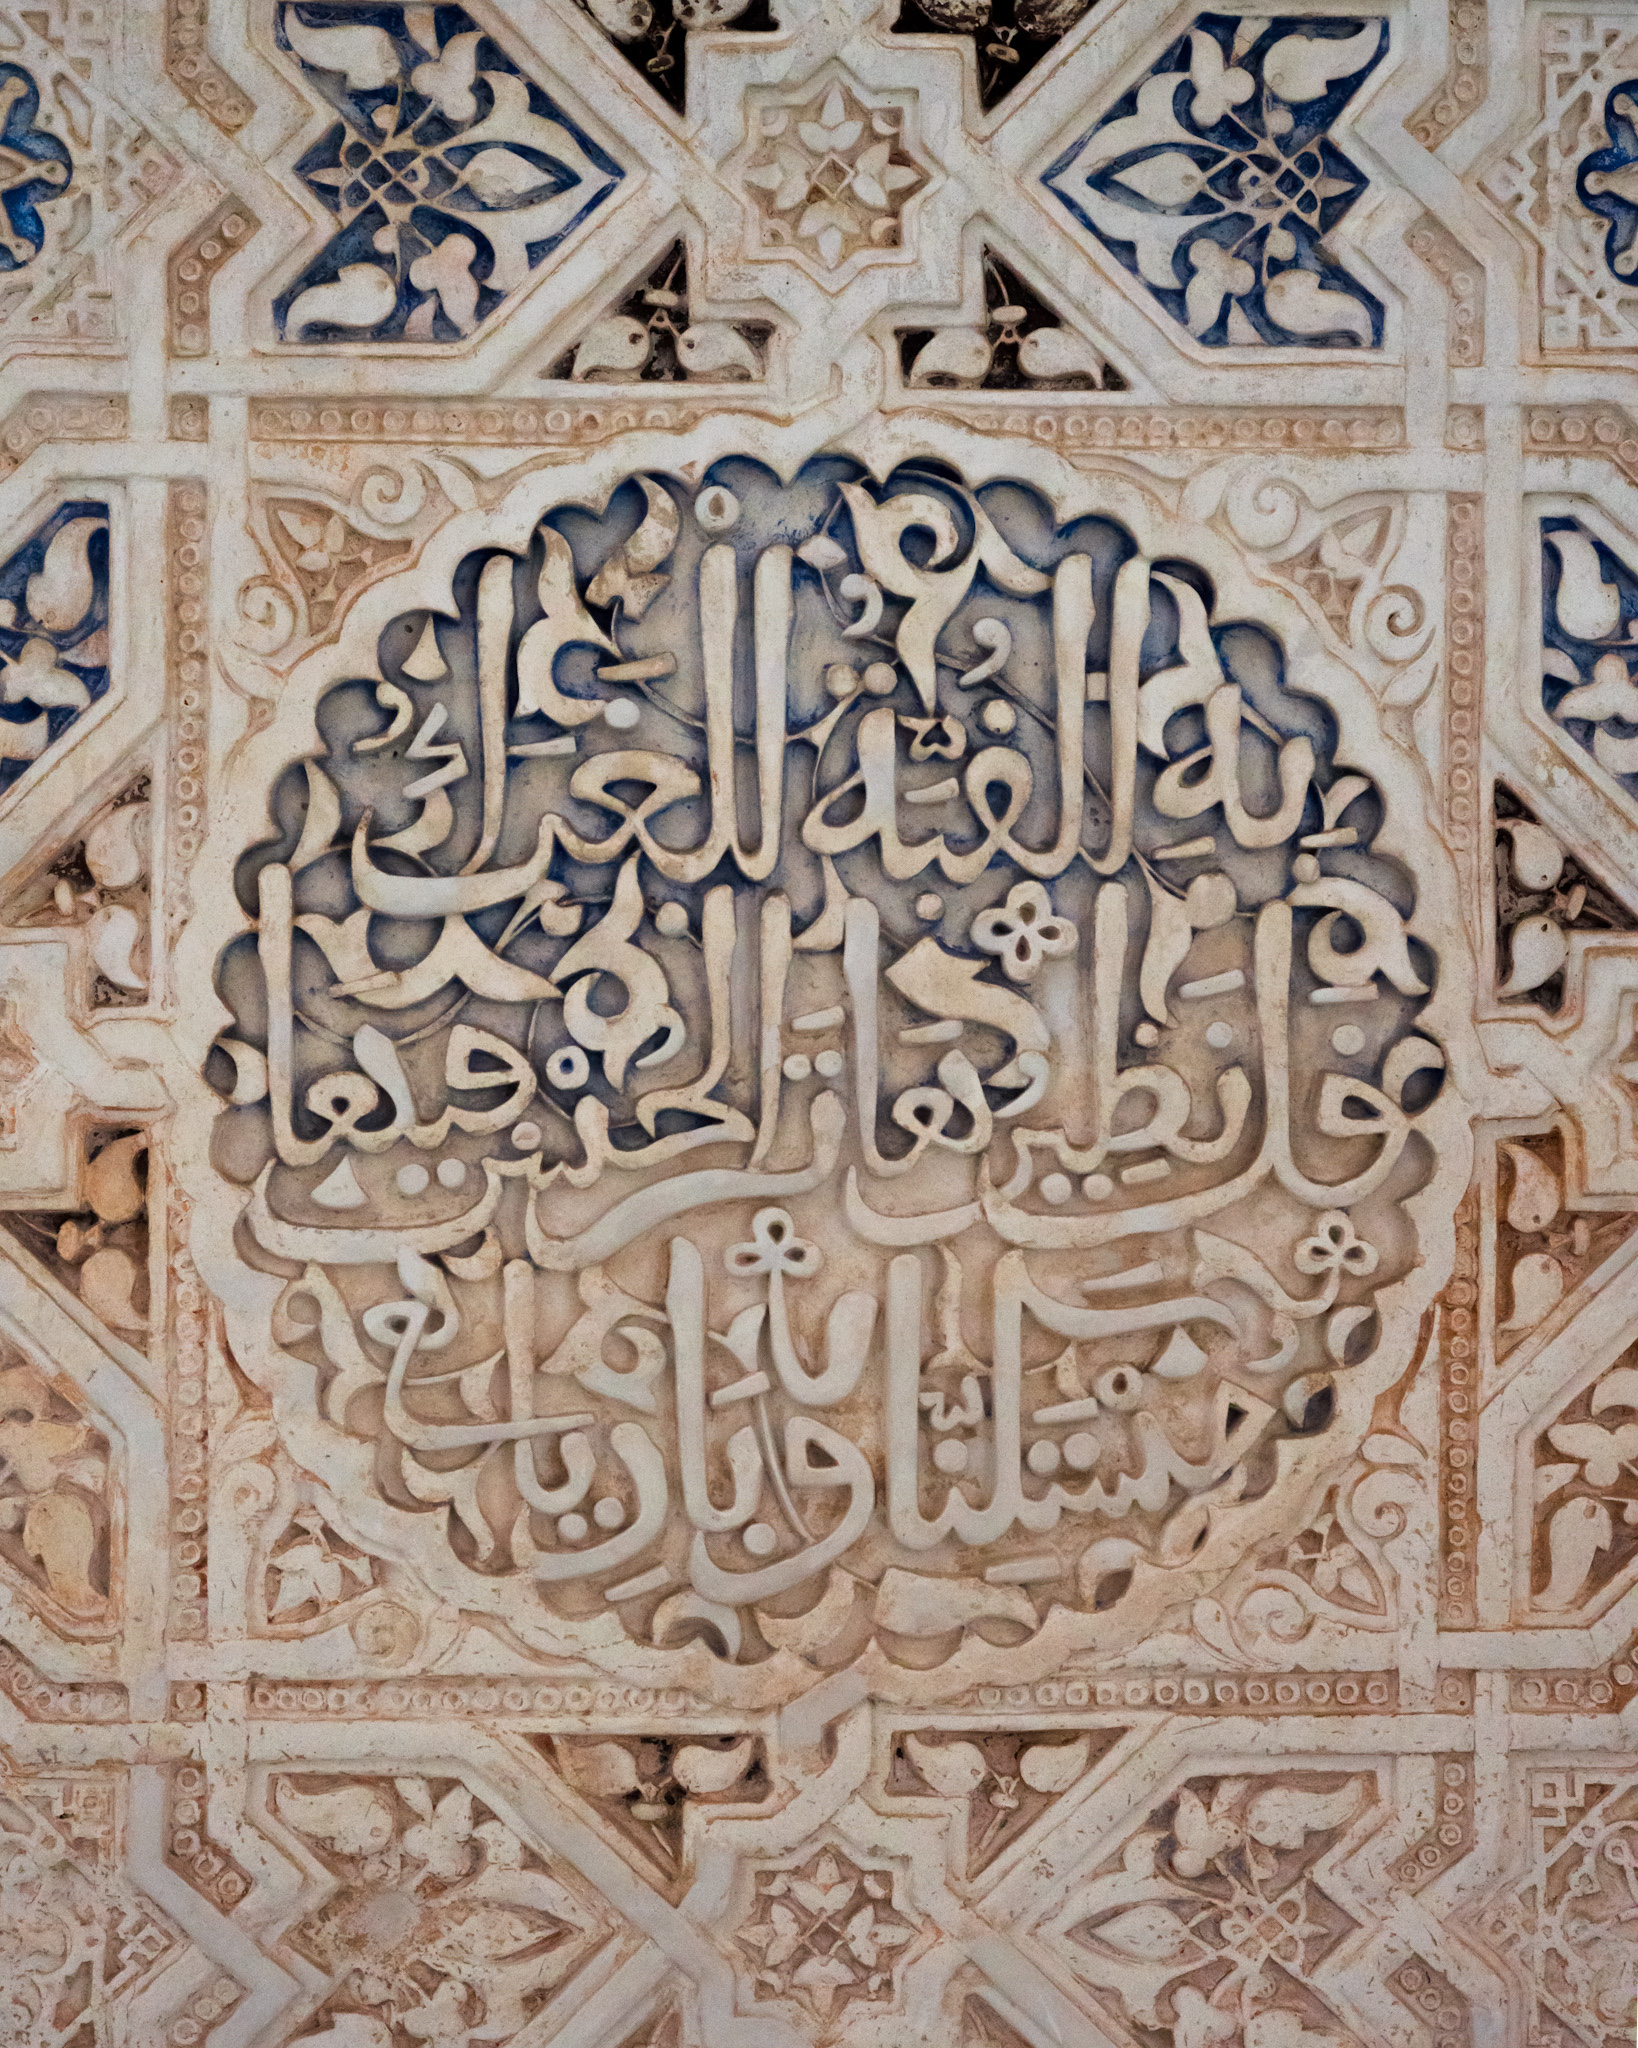 An intricate wall decoration with a mix of patterns and Arabic text. You can see remnants of ancient paint that has been faded or removed with time. 